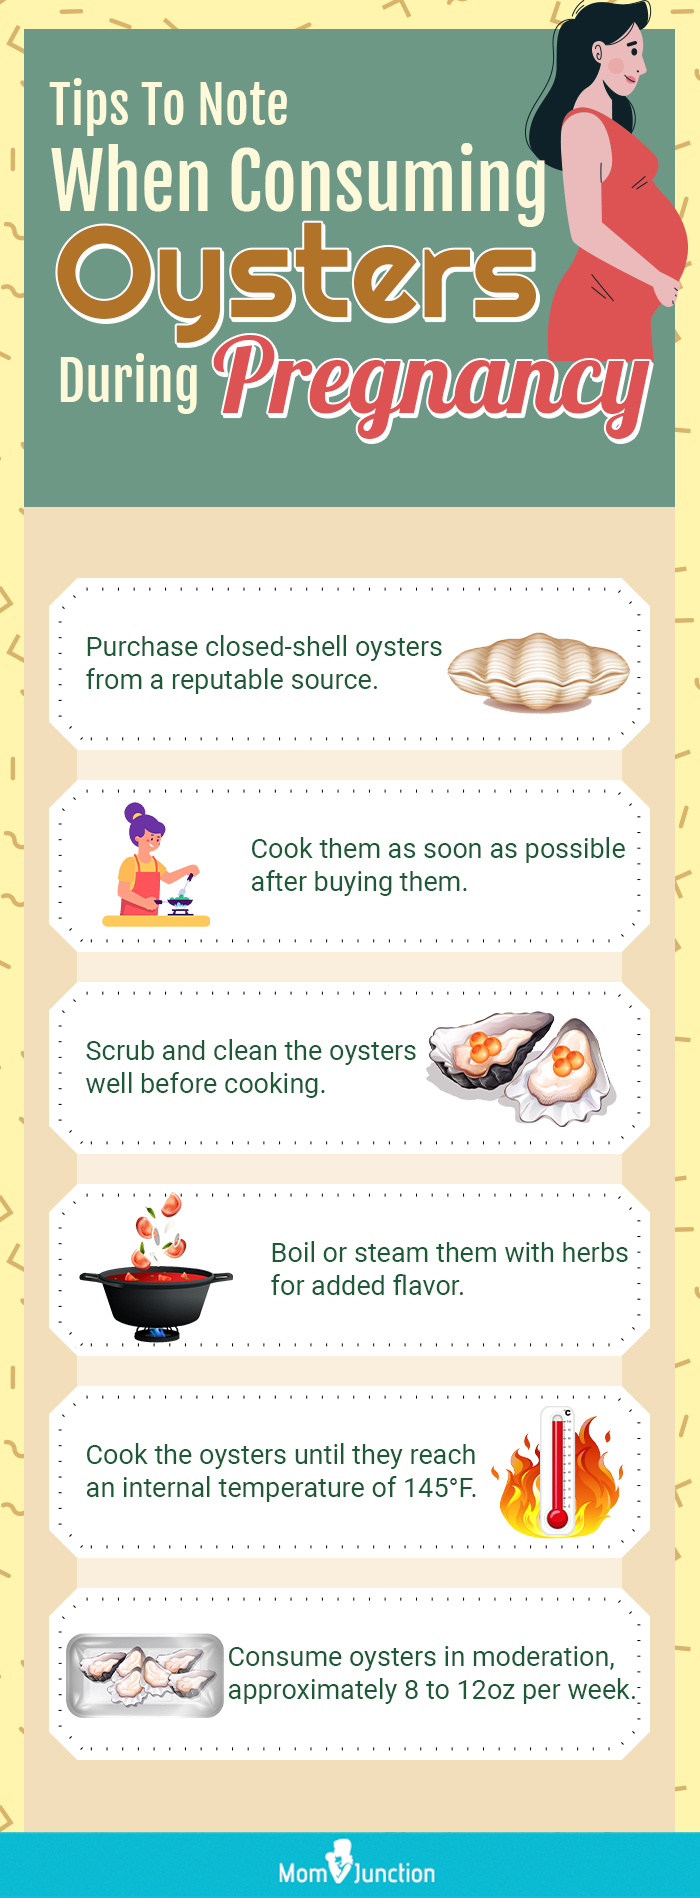 tips to note when consuming oysters during pregnancy (infographic)